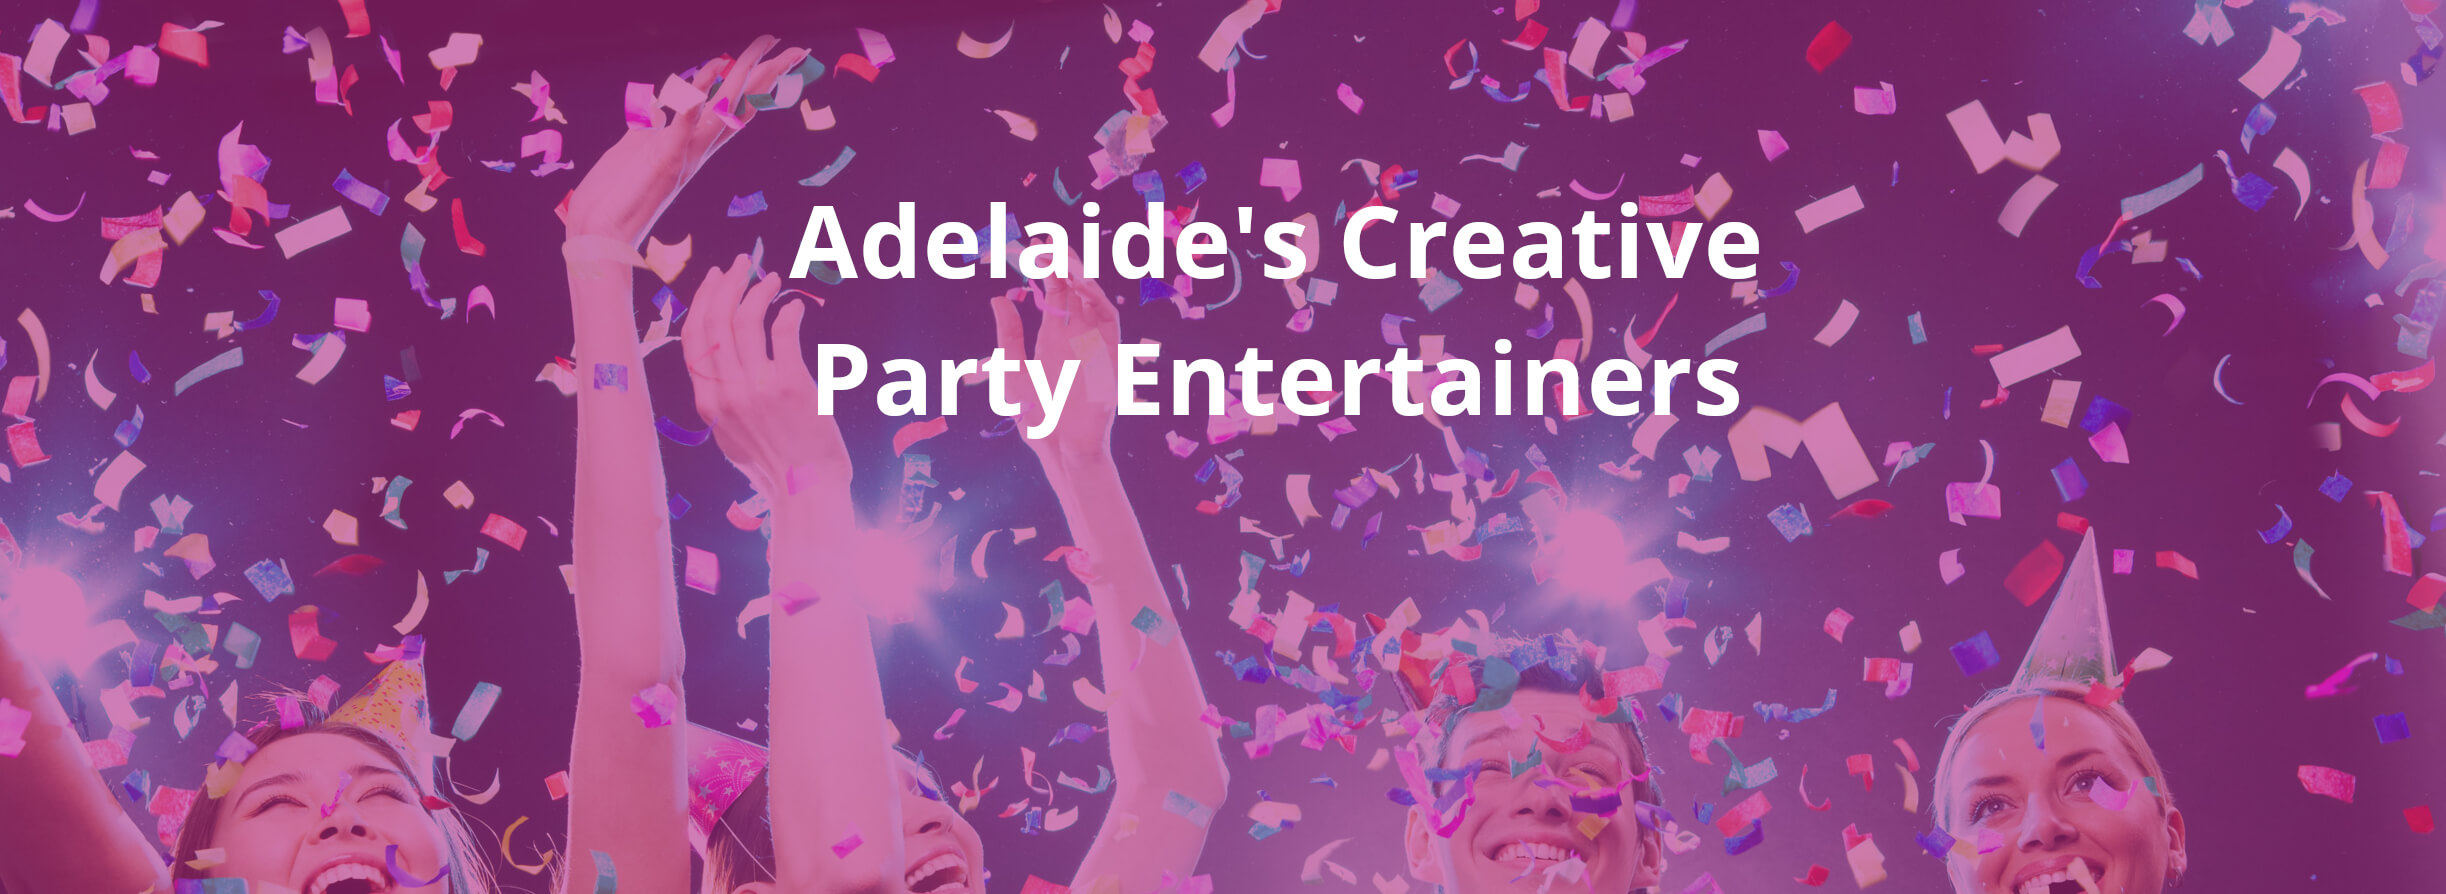 madhatterzparties adelaide party entertainers